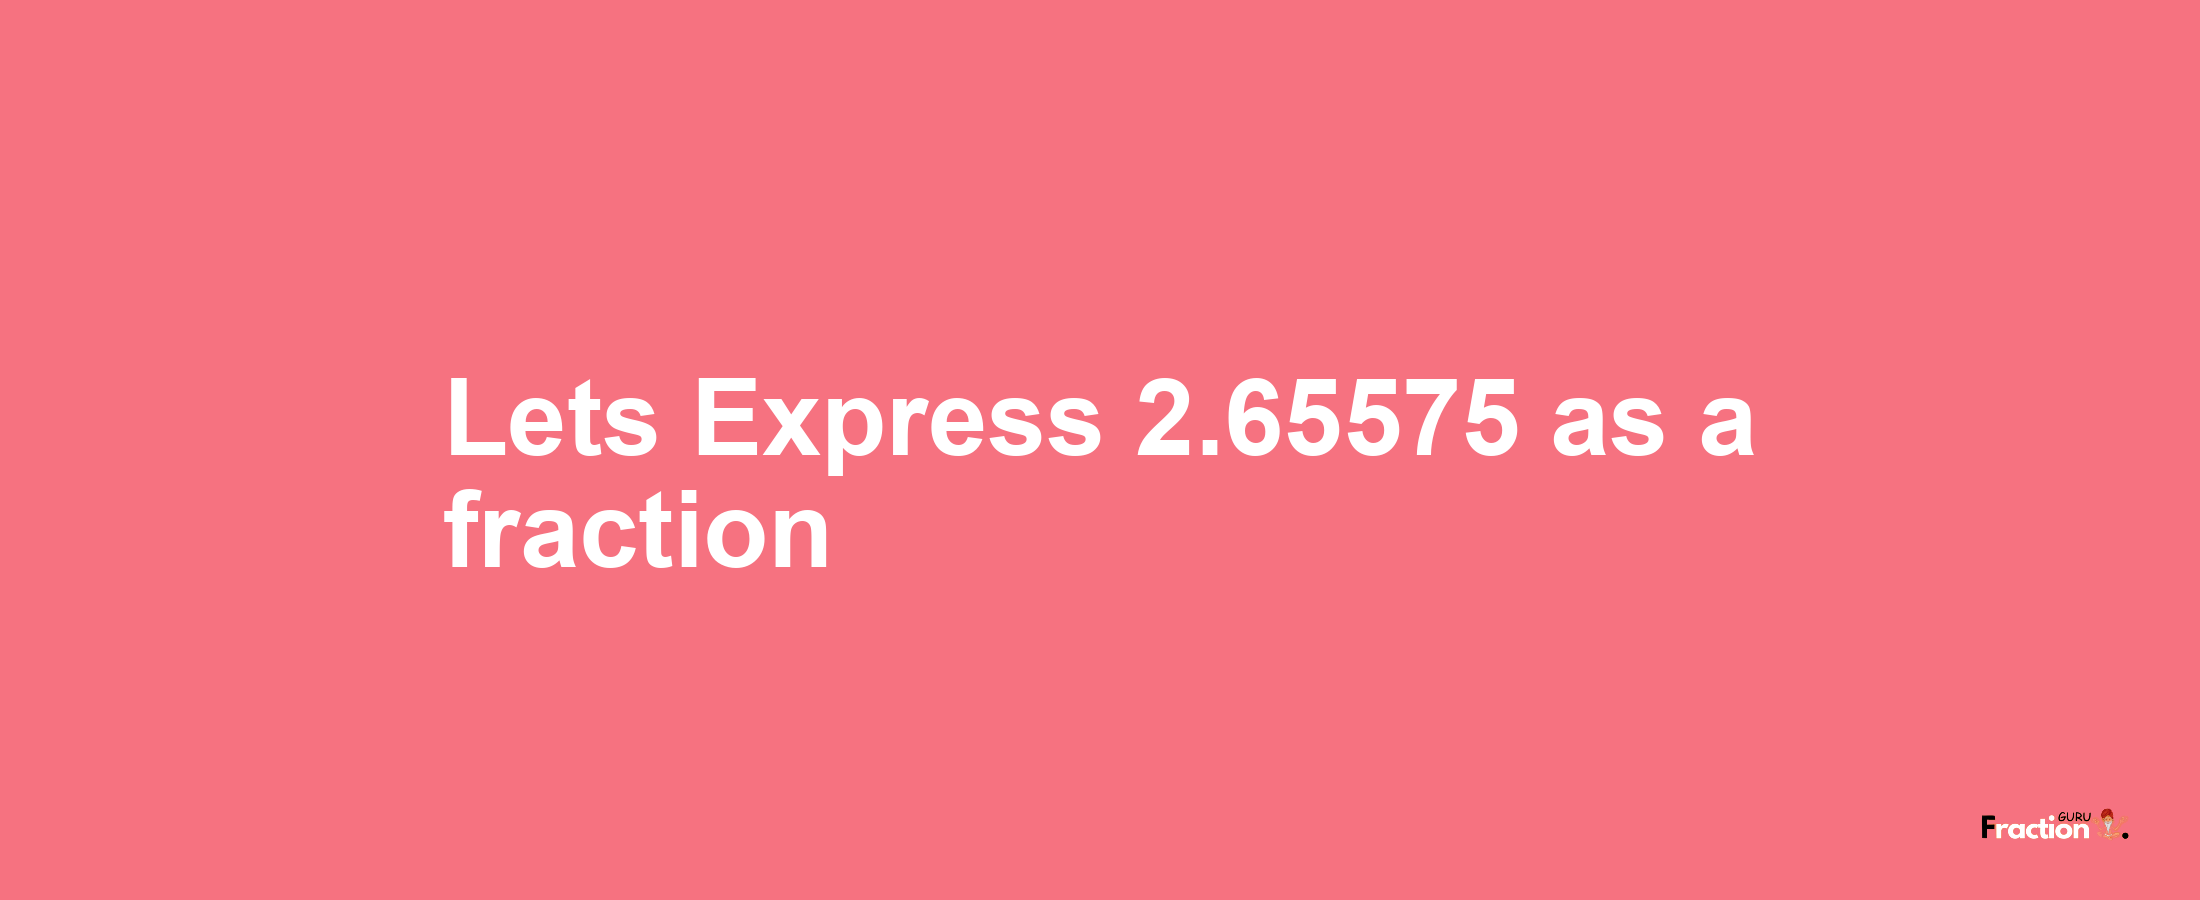 Lets Express 2.65575 as afraction